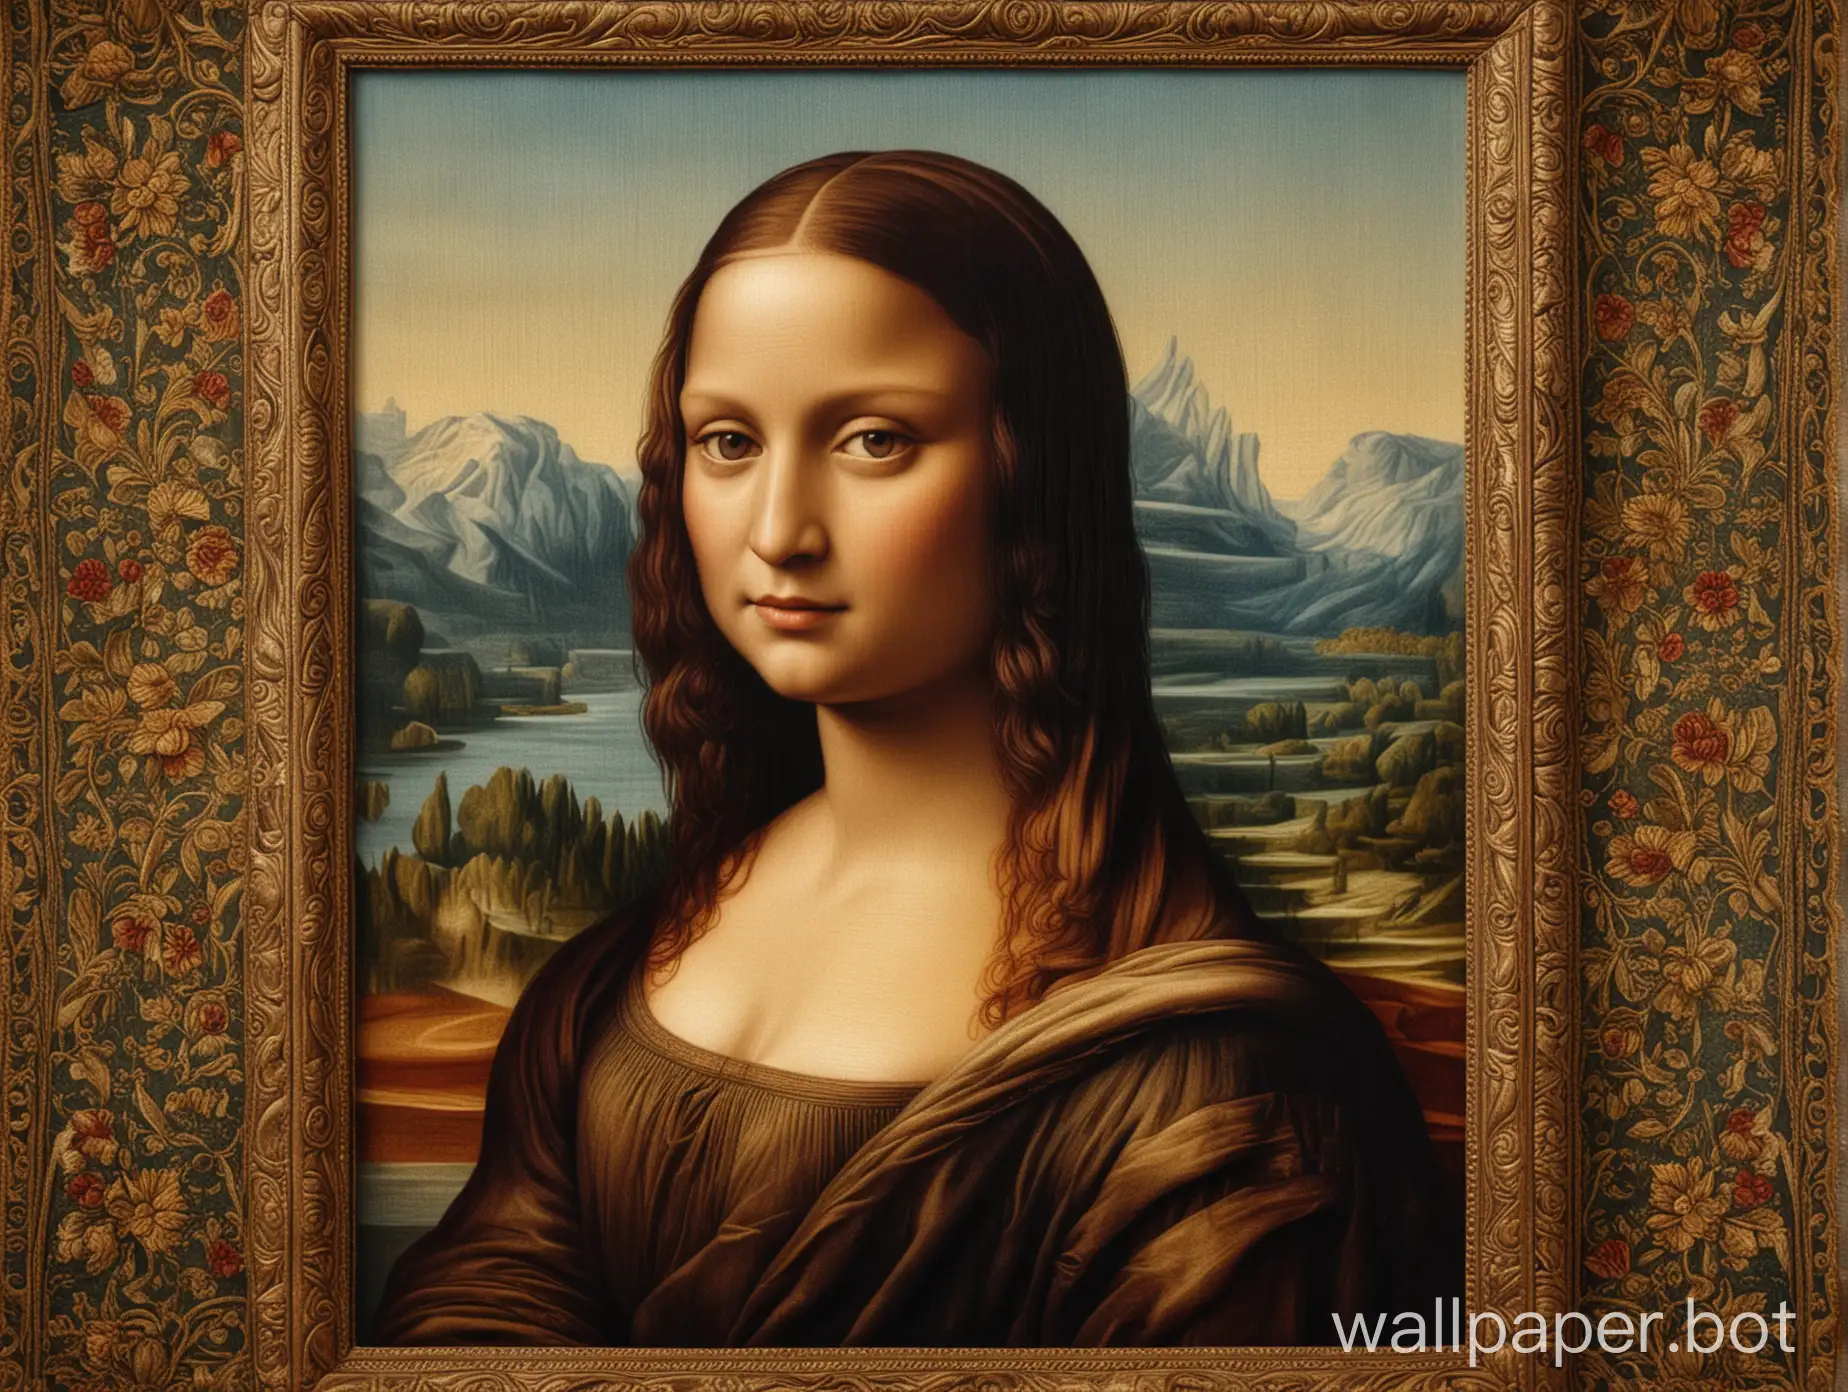 An astonishing 8k high-dynamic-range tapestry of the iconic Mona Lisa, The intricate details of her face, the folds of her clothing, and the background landscape are all captured in this miniature masterpiece. The stitching gives a unique texture and depth to the painting, while the HDR photography showcases a stunning contrast of colours and light. The result is an awe-inspiring tribute to Leonardo Da Vinci's original artwork.